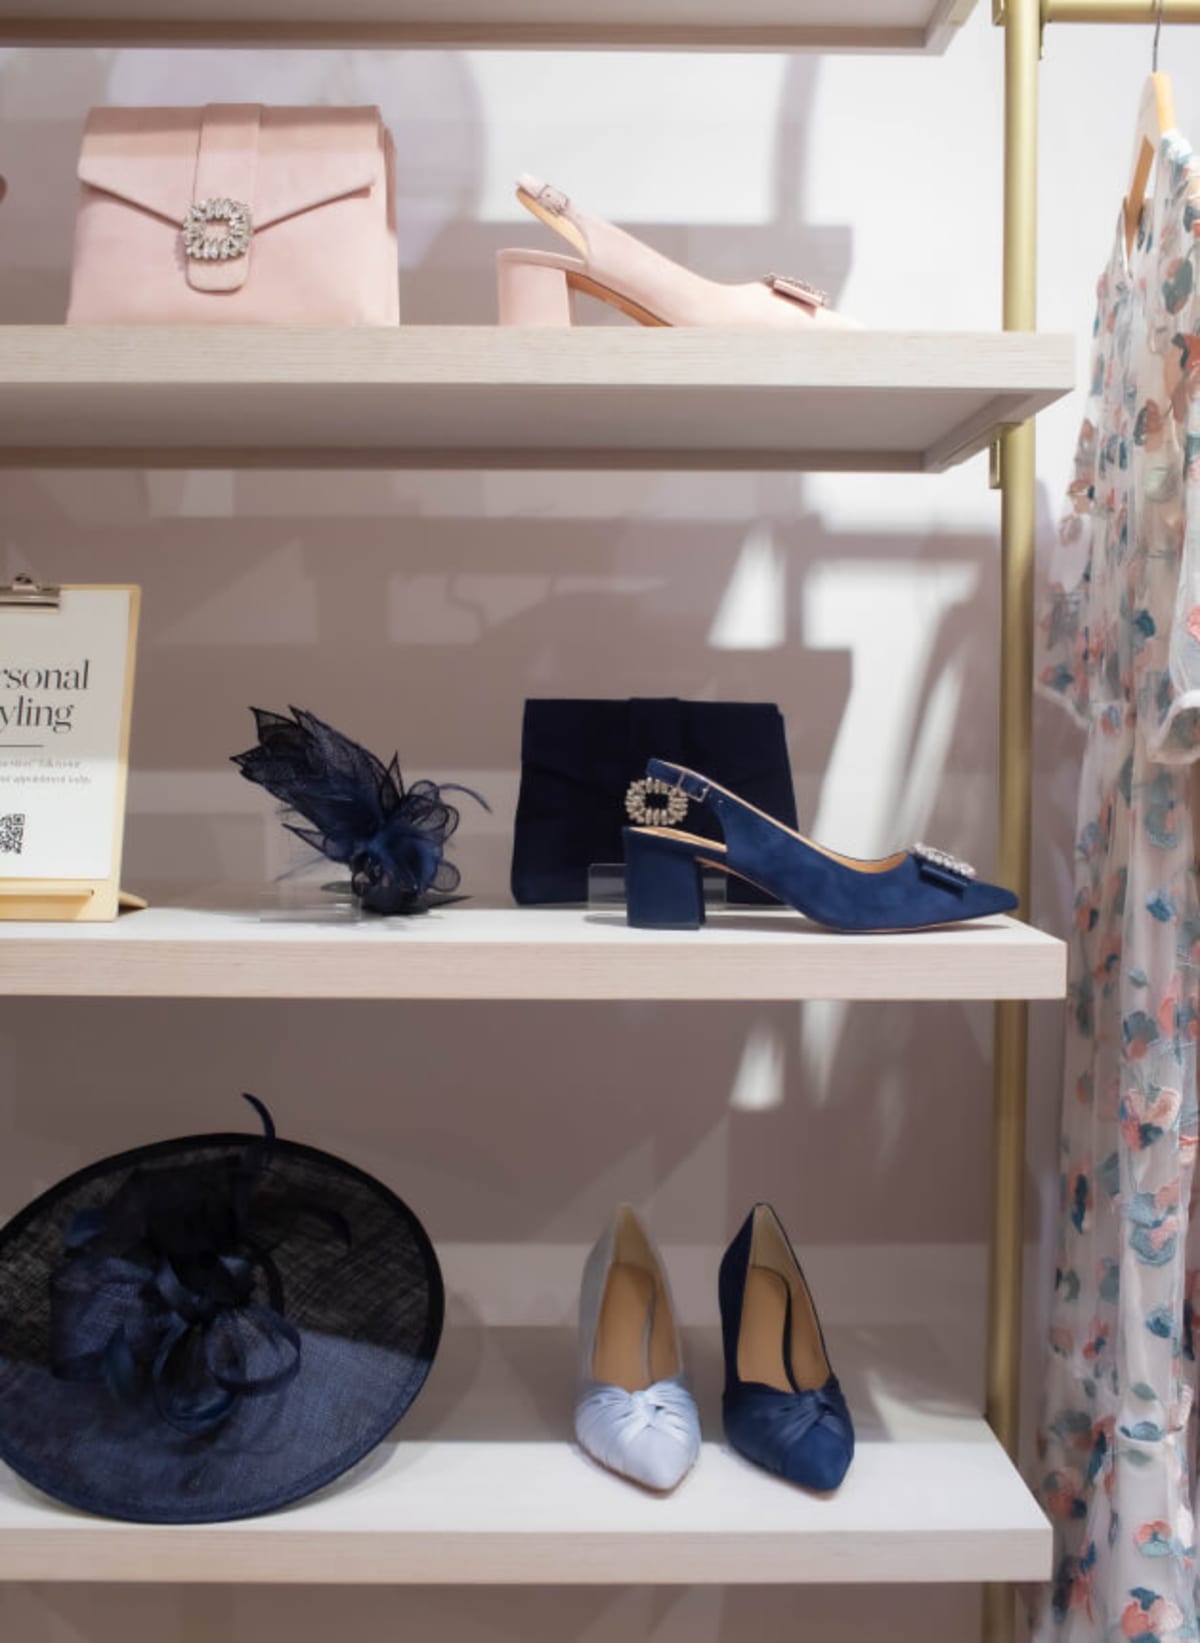 Occasion accessories displayed in store